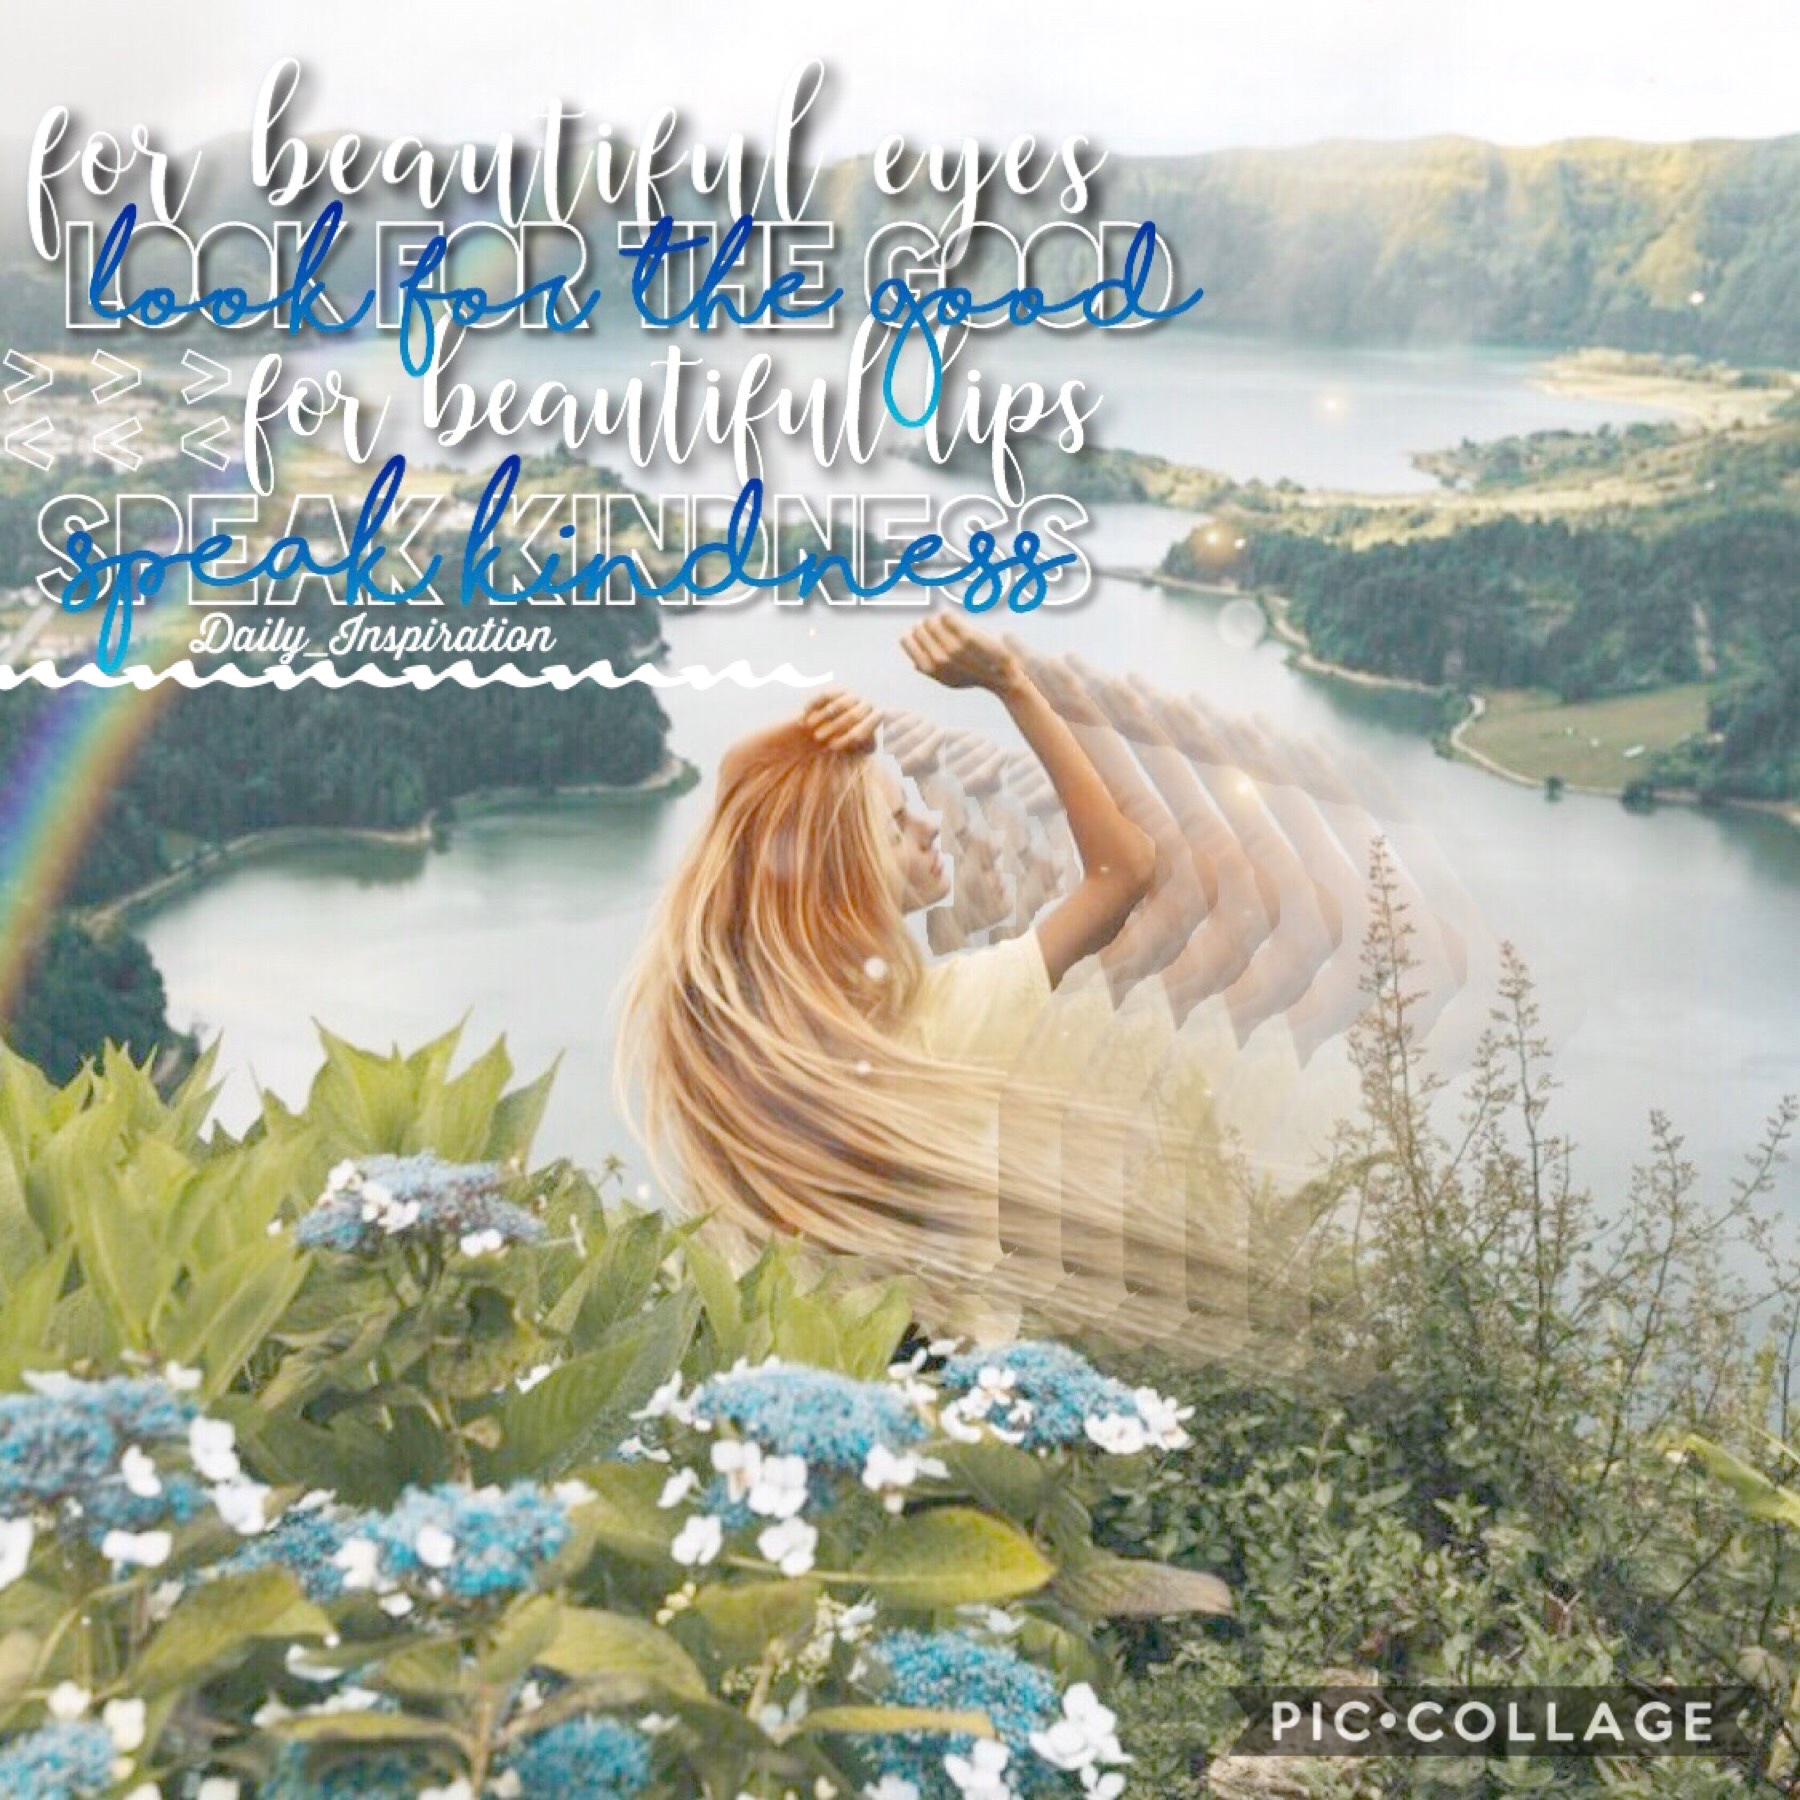 ✨tap✨
hello lovelies💗 have an amazing day😊💗
QOTD:favorite artists?
AOTD: Van Gogh, Claude Monet, Andy Warhol, and many more!
44th collage
8/25/2018